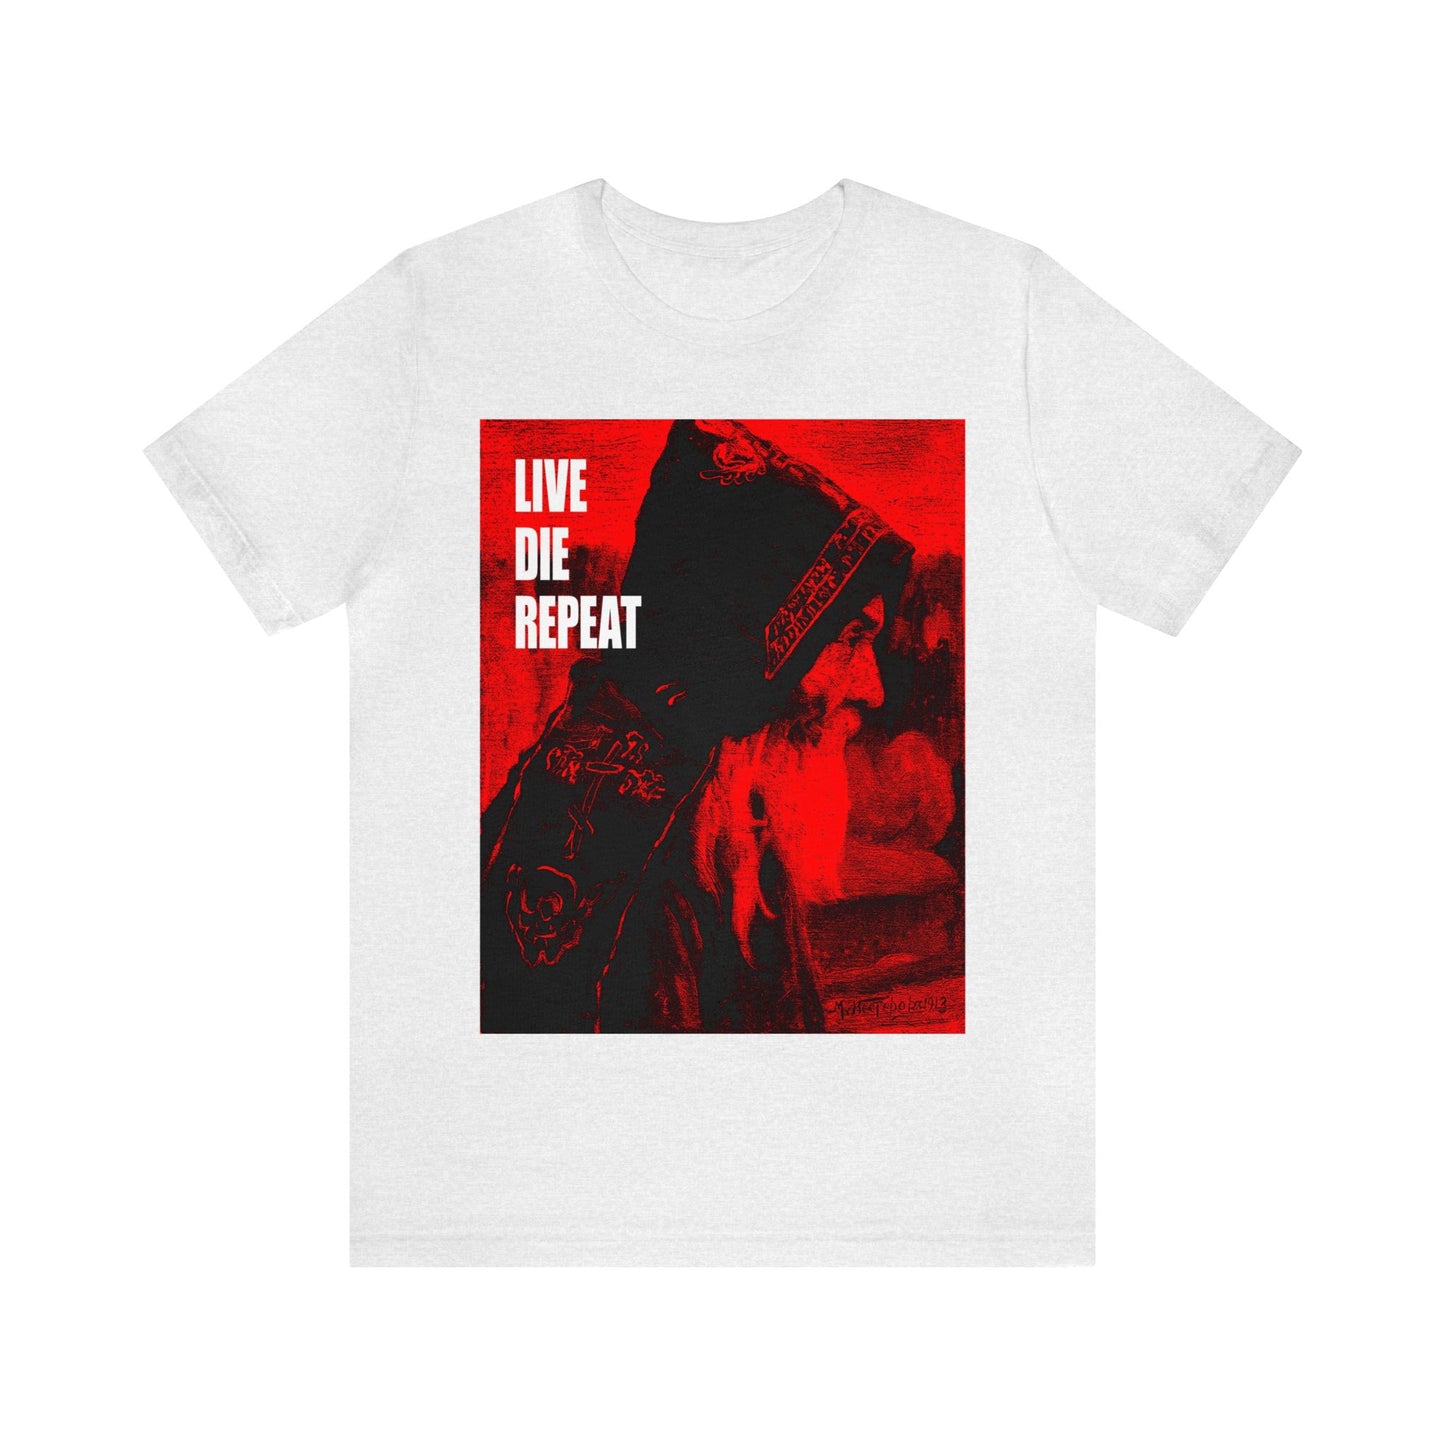 Live Die Repeat ("Monk" by Mikhail Nesterov) No. 1 | Orthodox Christian T-Shirt